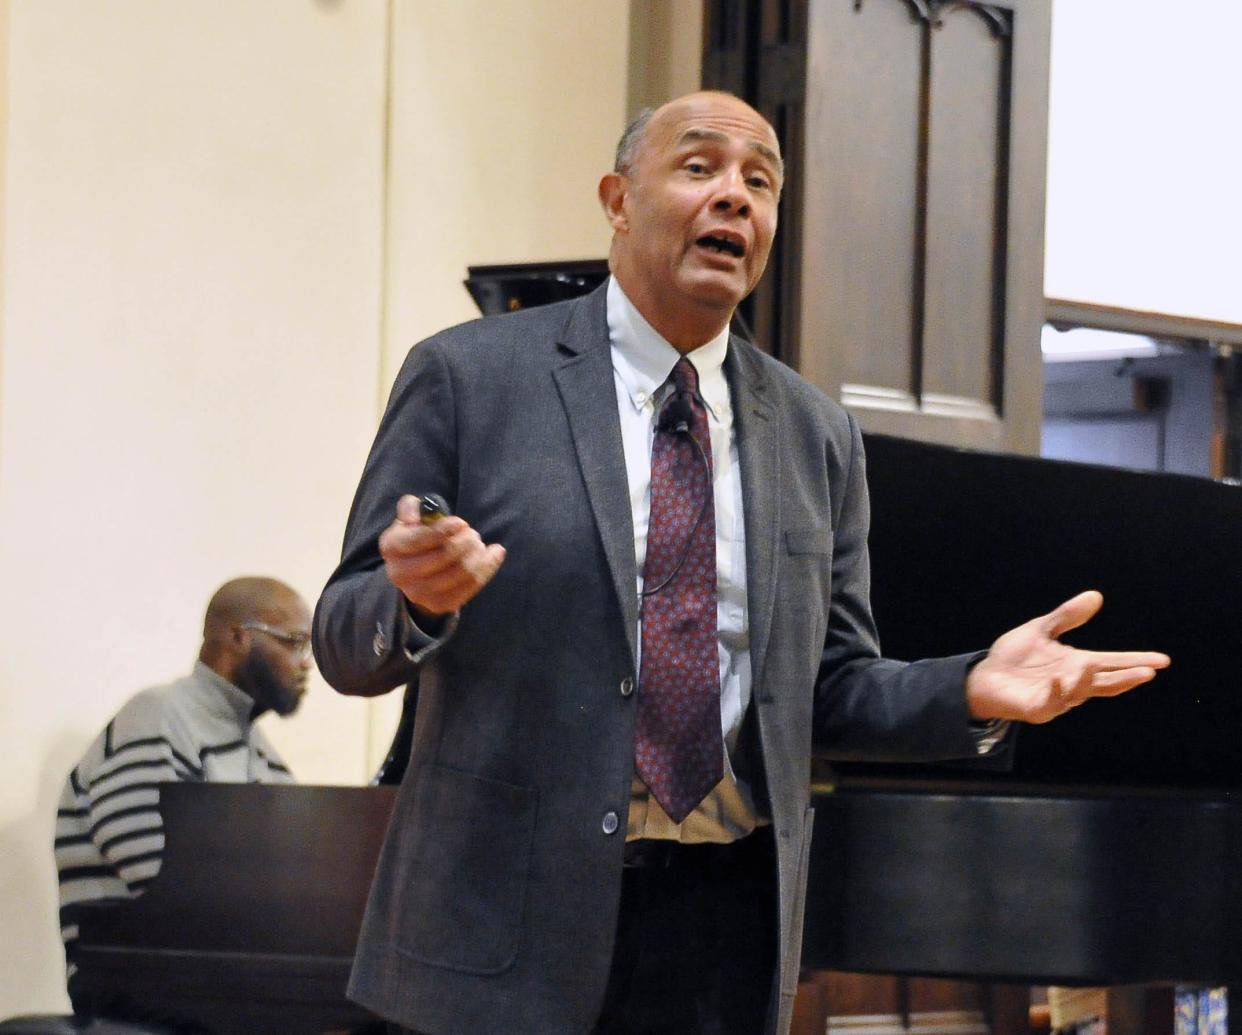 Martin Luther King Jr. Day speaker Dr. Ric S. Sheffield, Professor Emeritus, Kenyon College, said, "History should not be a stack of books. It should be much more personal." The service was Monday evening in Wooster.